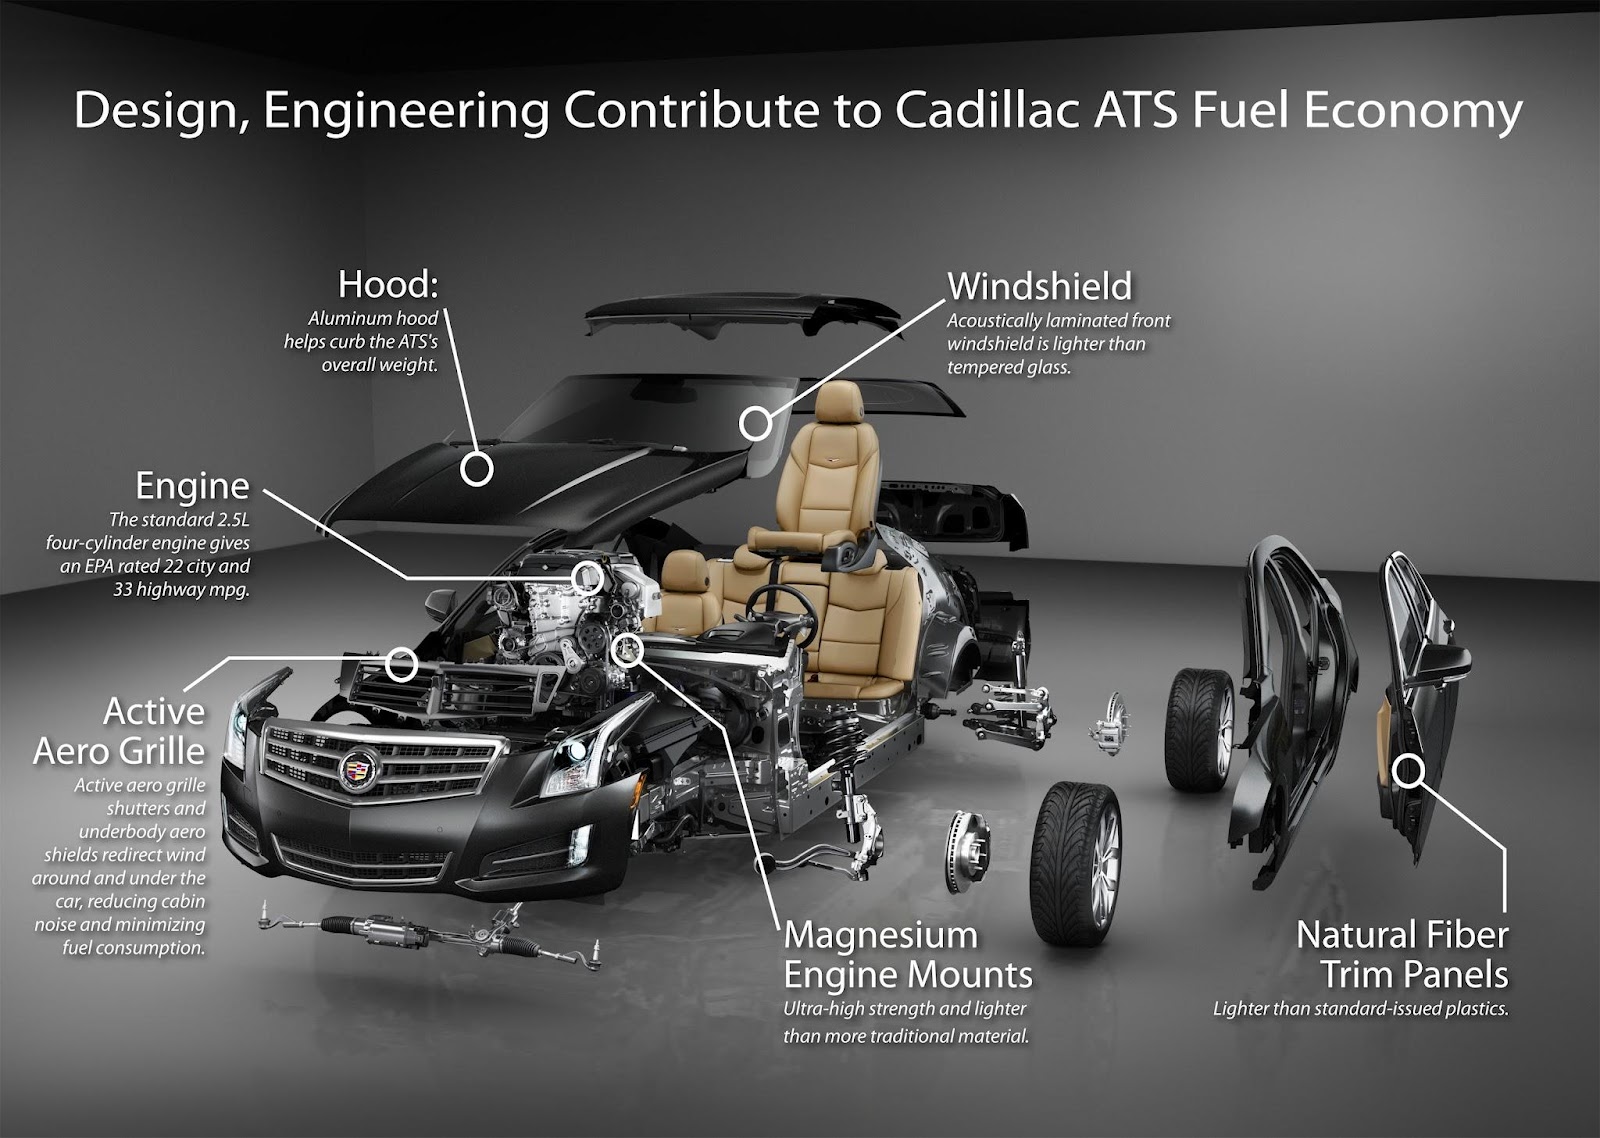 A Brief Summary of the Impact of Engine Design on Fuel Consumption